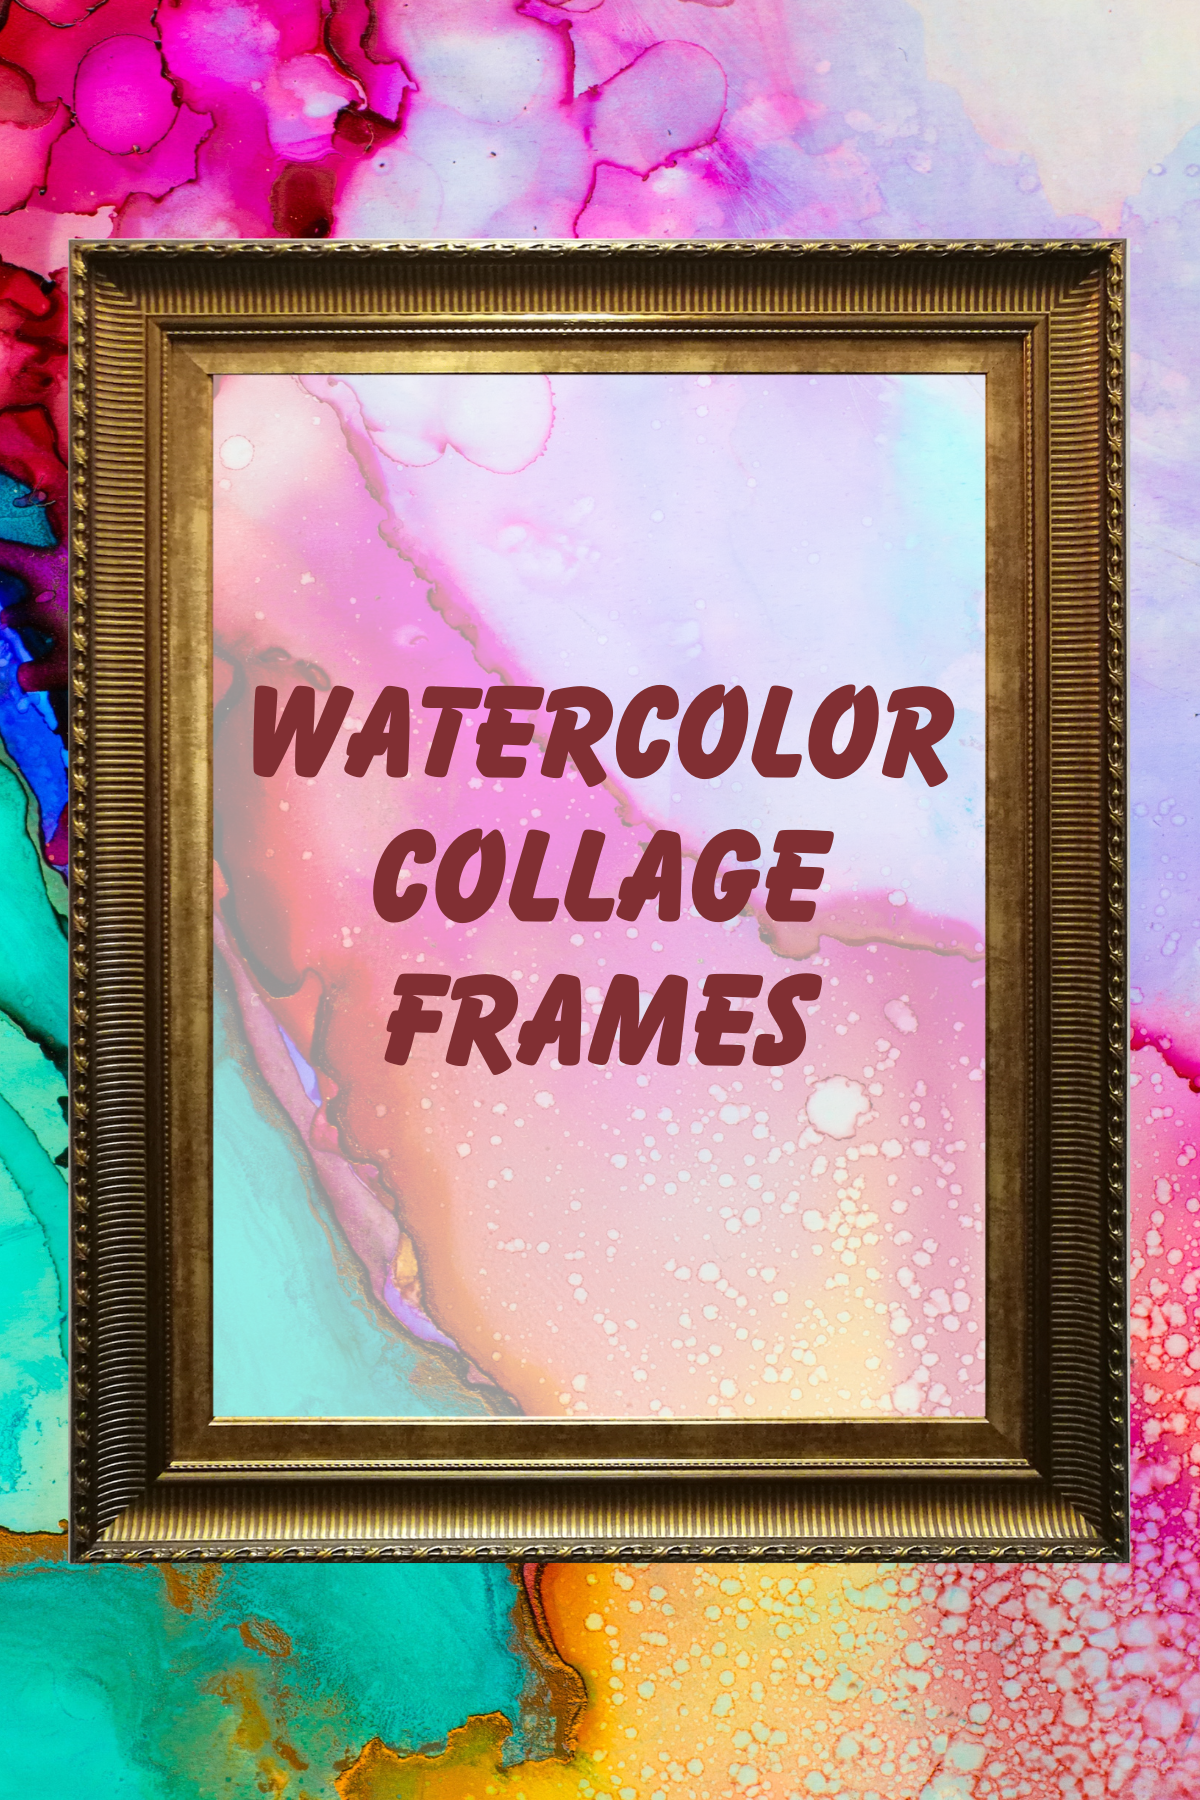 A rainbow watercolor background, overwhich is a fancy golden picture frame which is around the text "Watercolor Collage Frames".